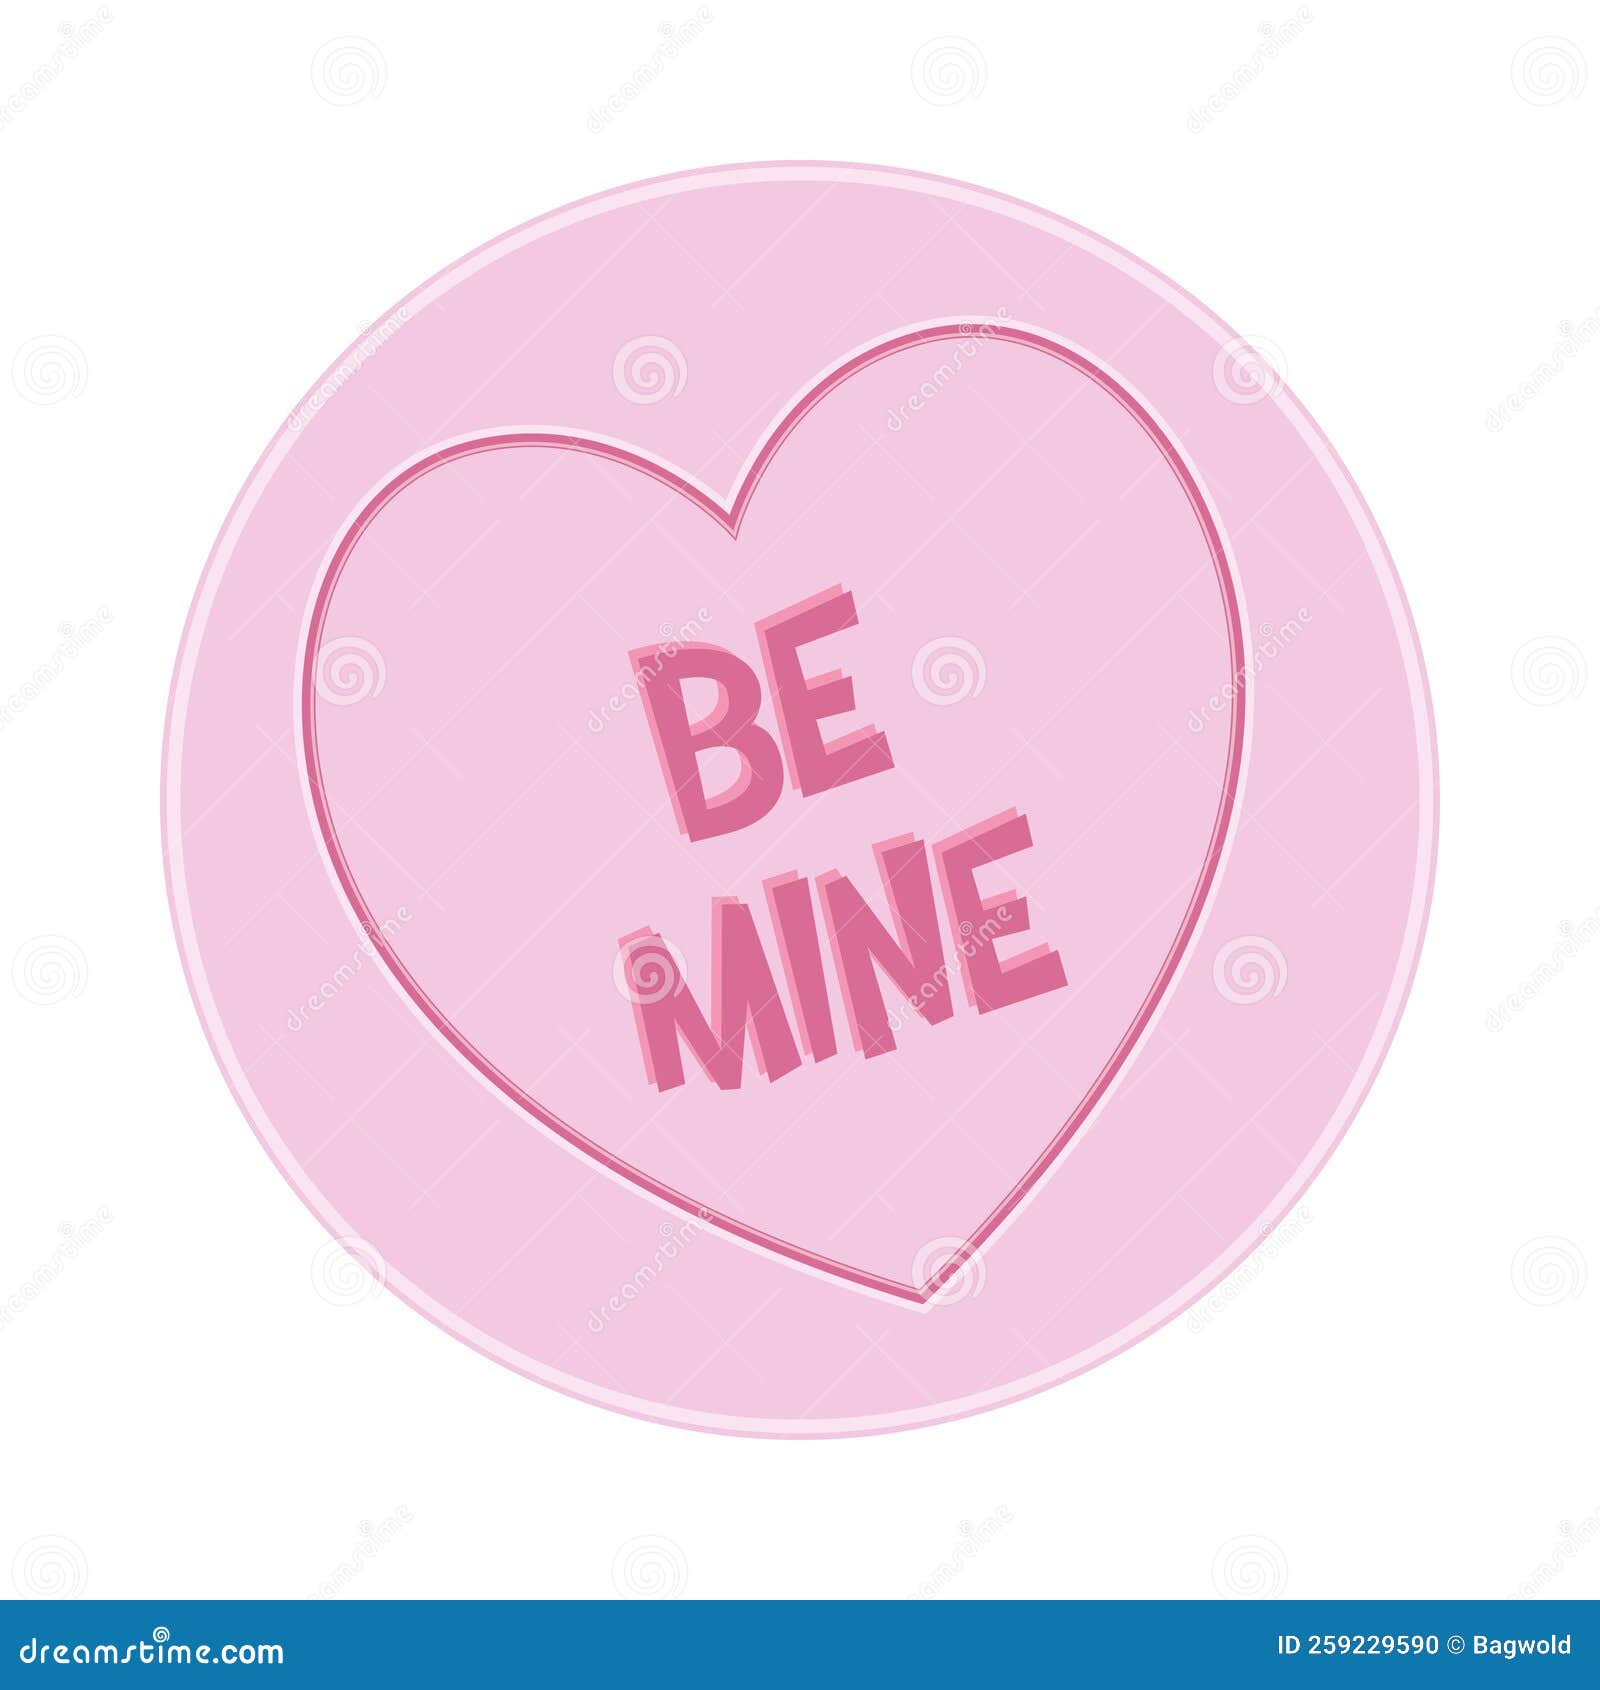 loveheart sweet candy - be mine message  